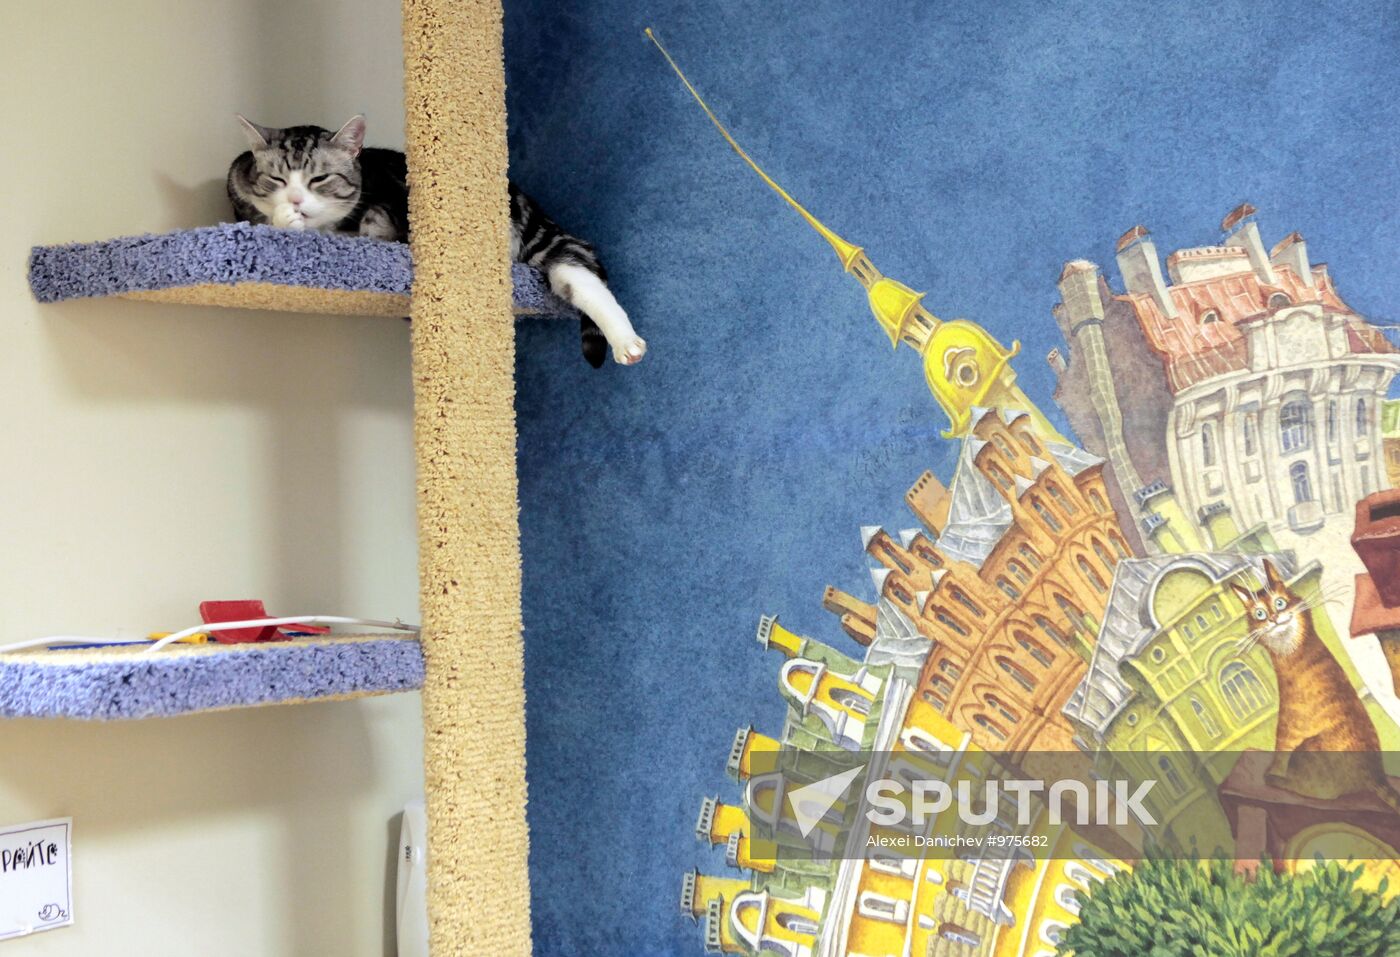 Republic of Cats Cafe opened in St Petersburg